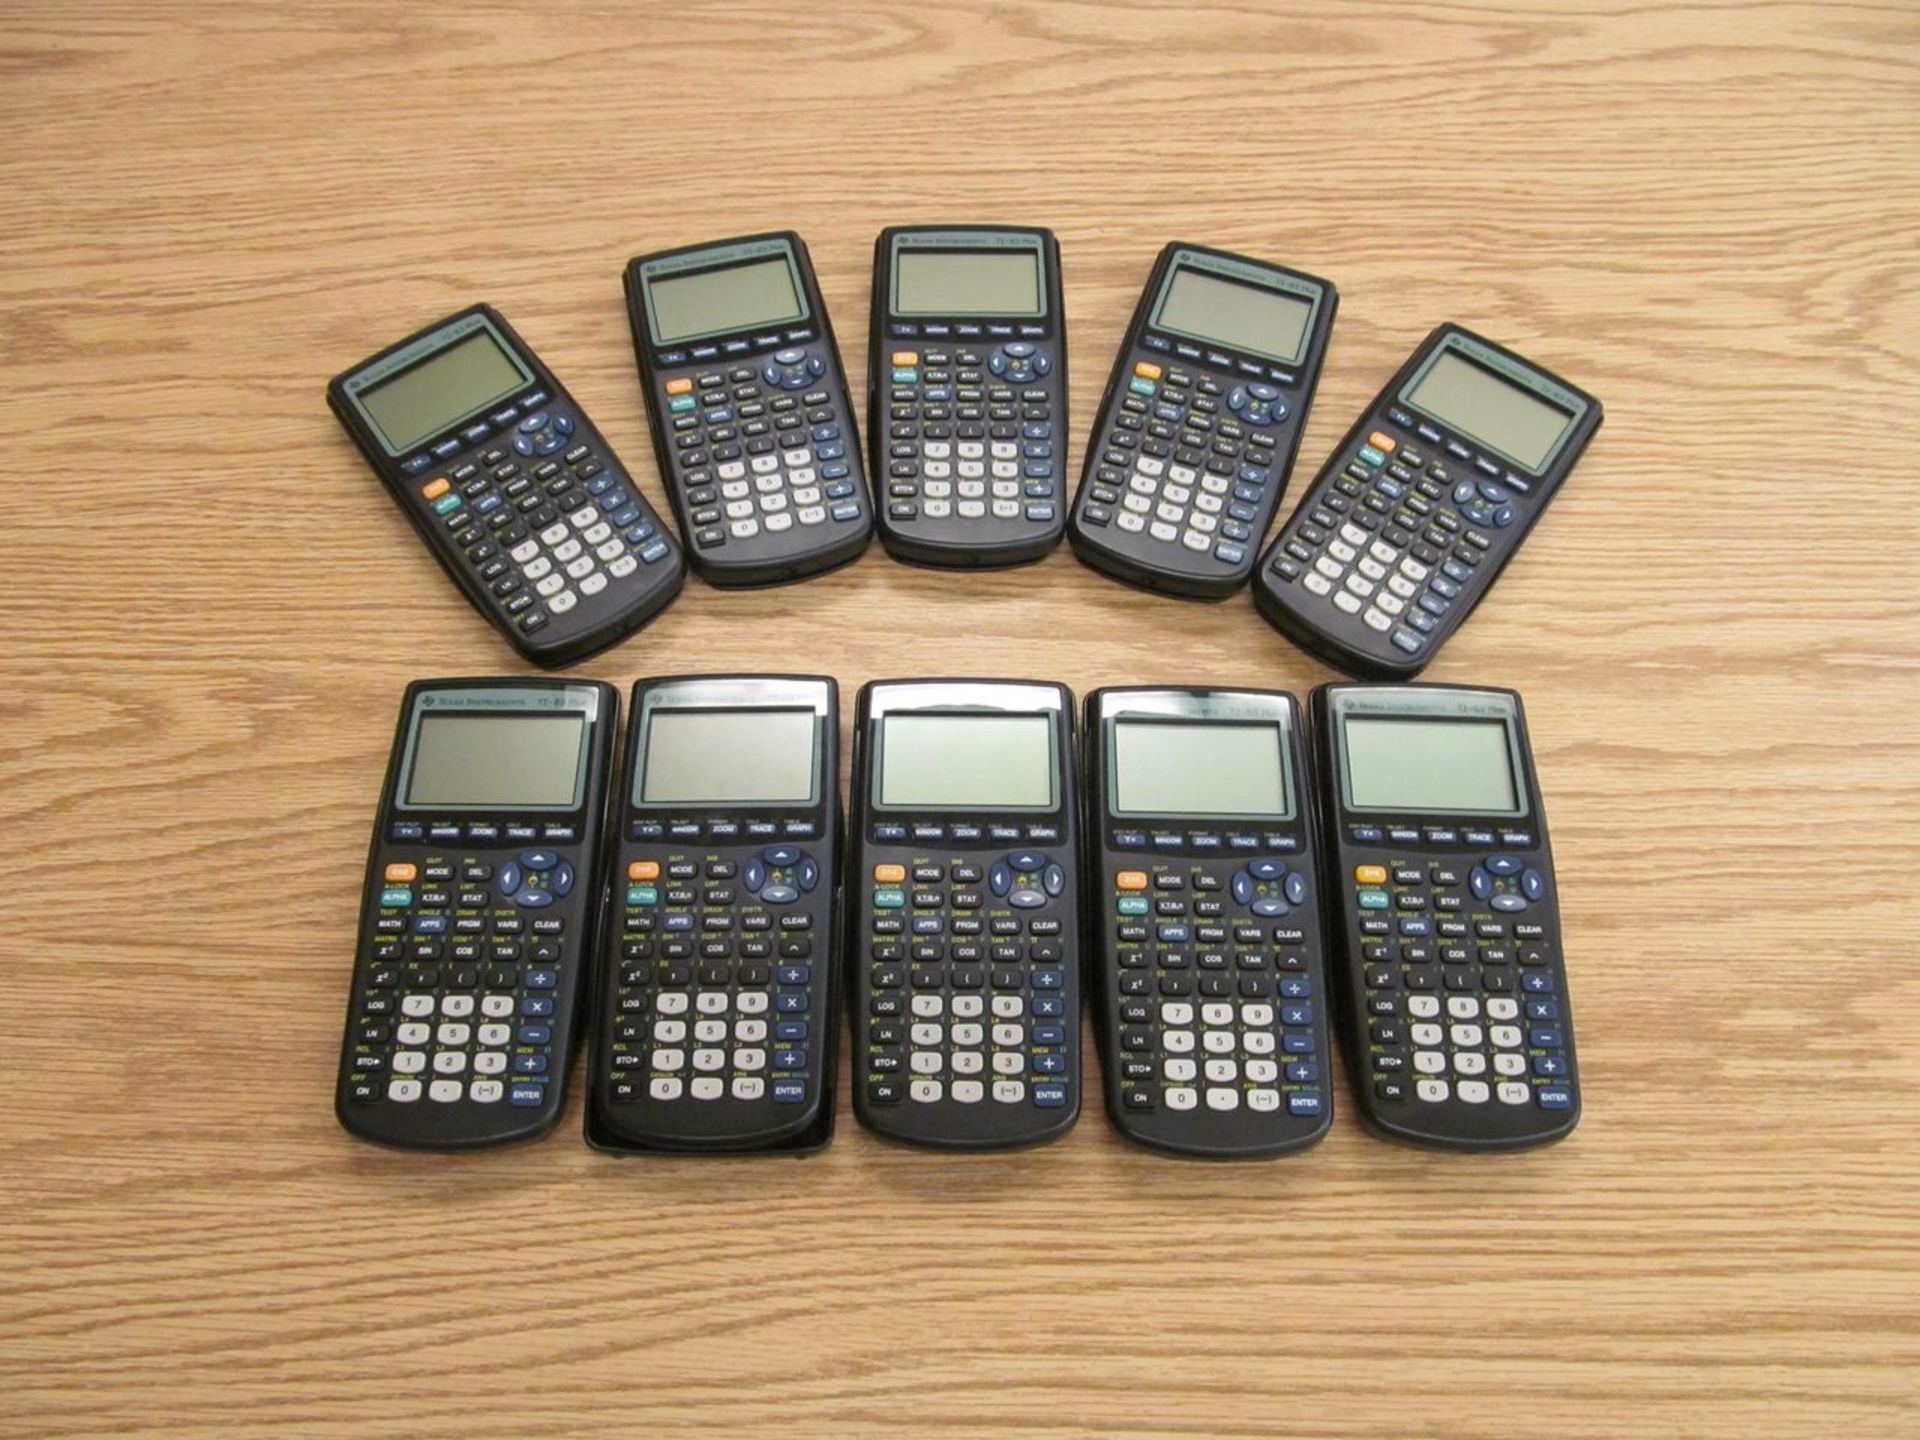 Lot - (20) Texas Instruments TI-83 plus Graphing Calculator (Main Office, File Room)